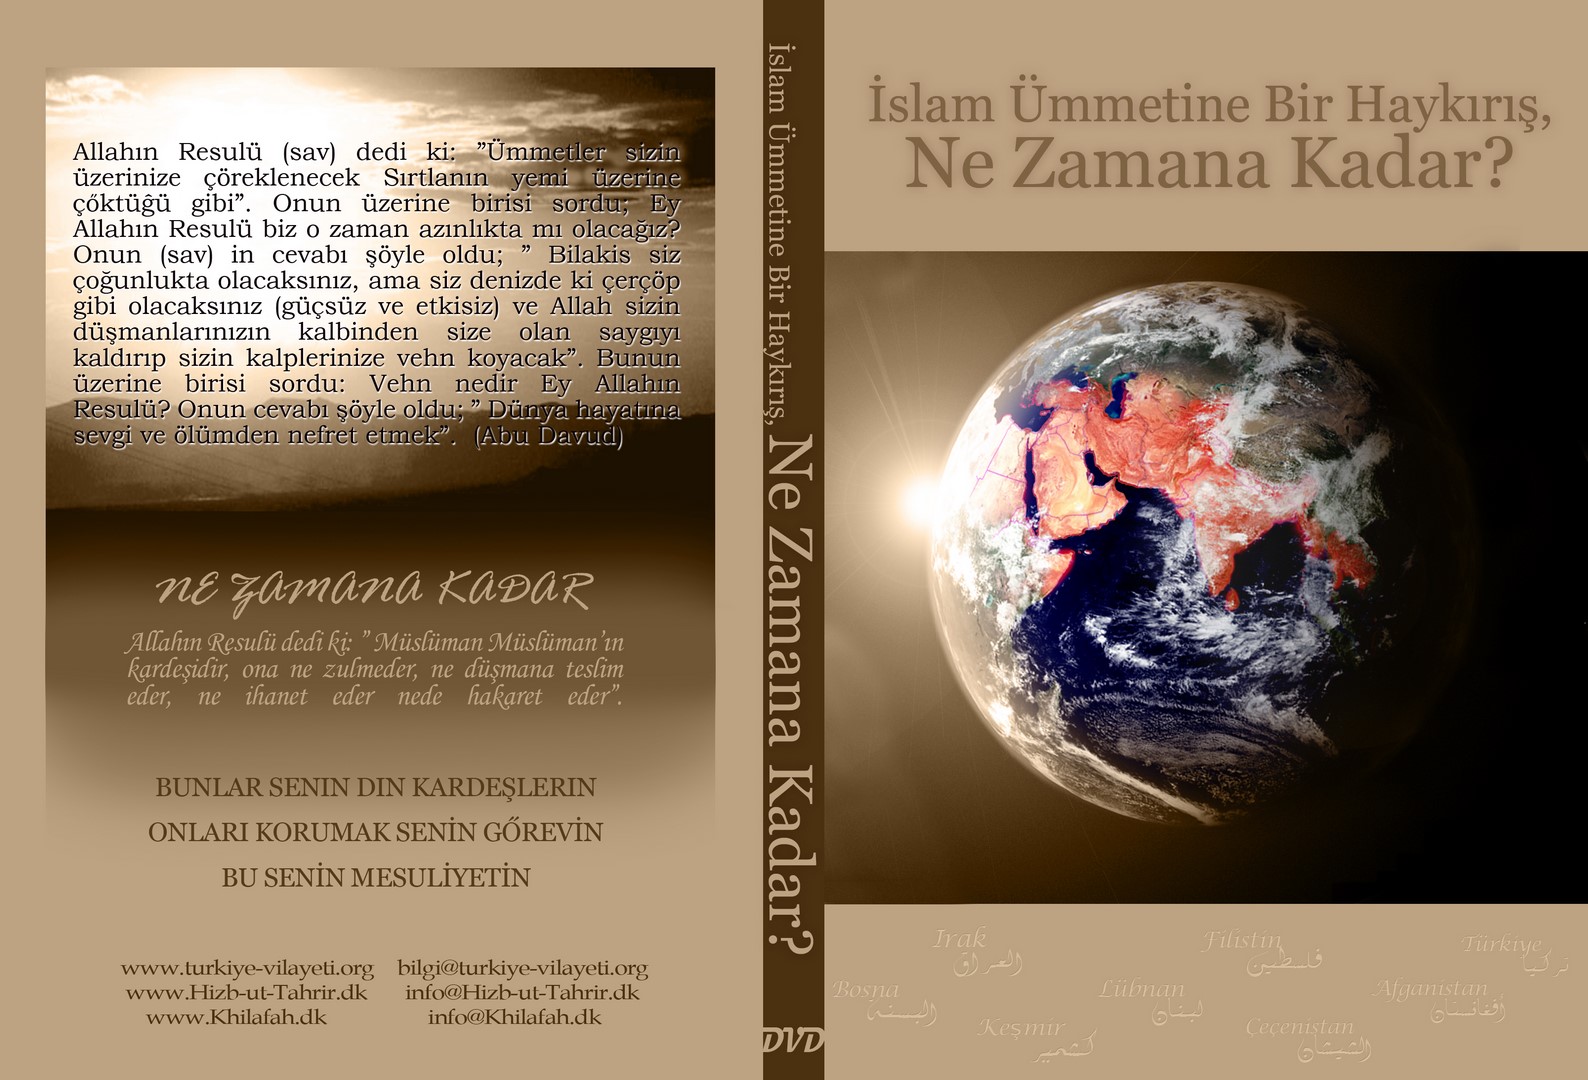 Click to enlarge image cover_turkish.jpg